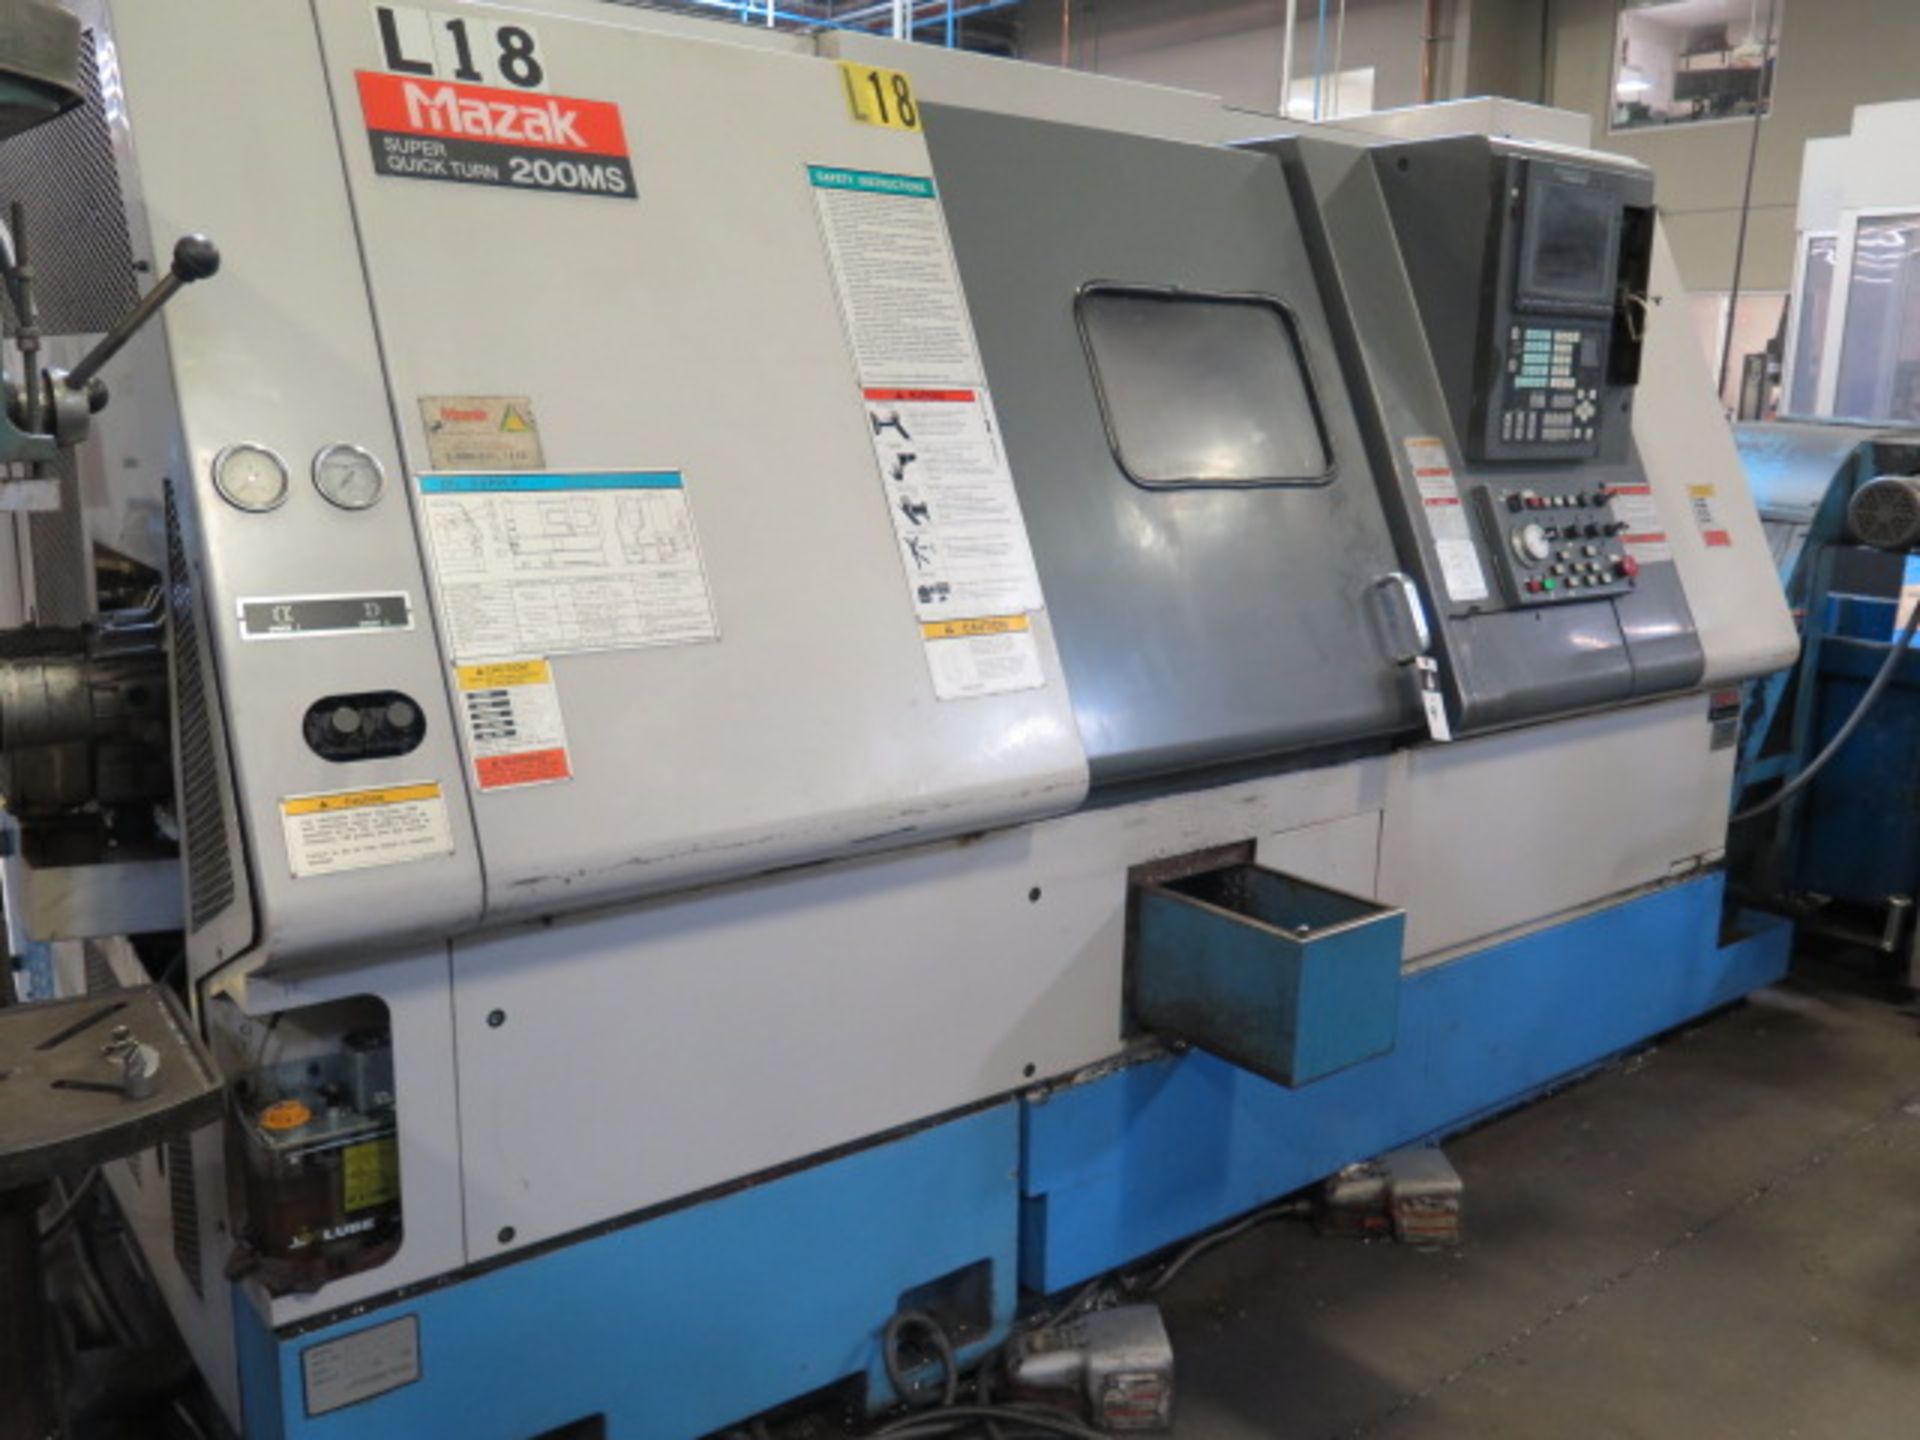 2002 Mazak Super QT 200MS Twin Spindle Live Turret CNC Lathe (TOOLING NOT INCLUDED), SOLD AS IS - Image 2 of 20